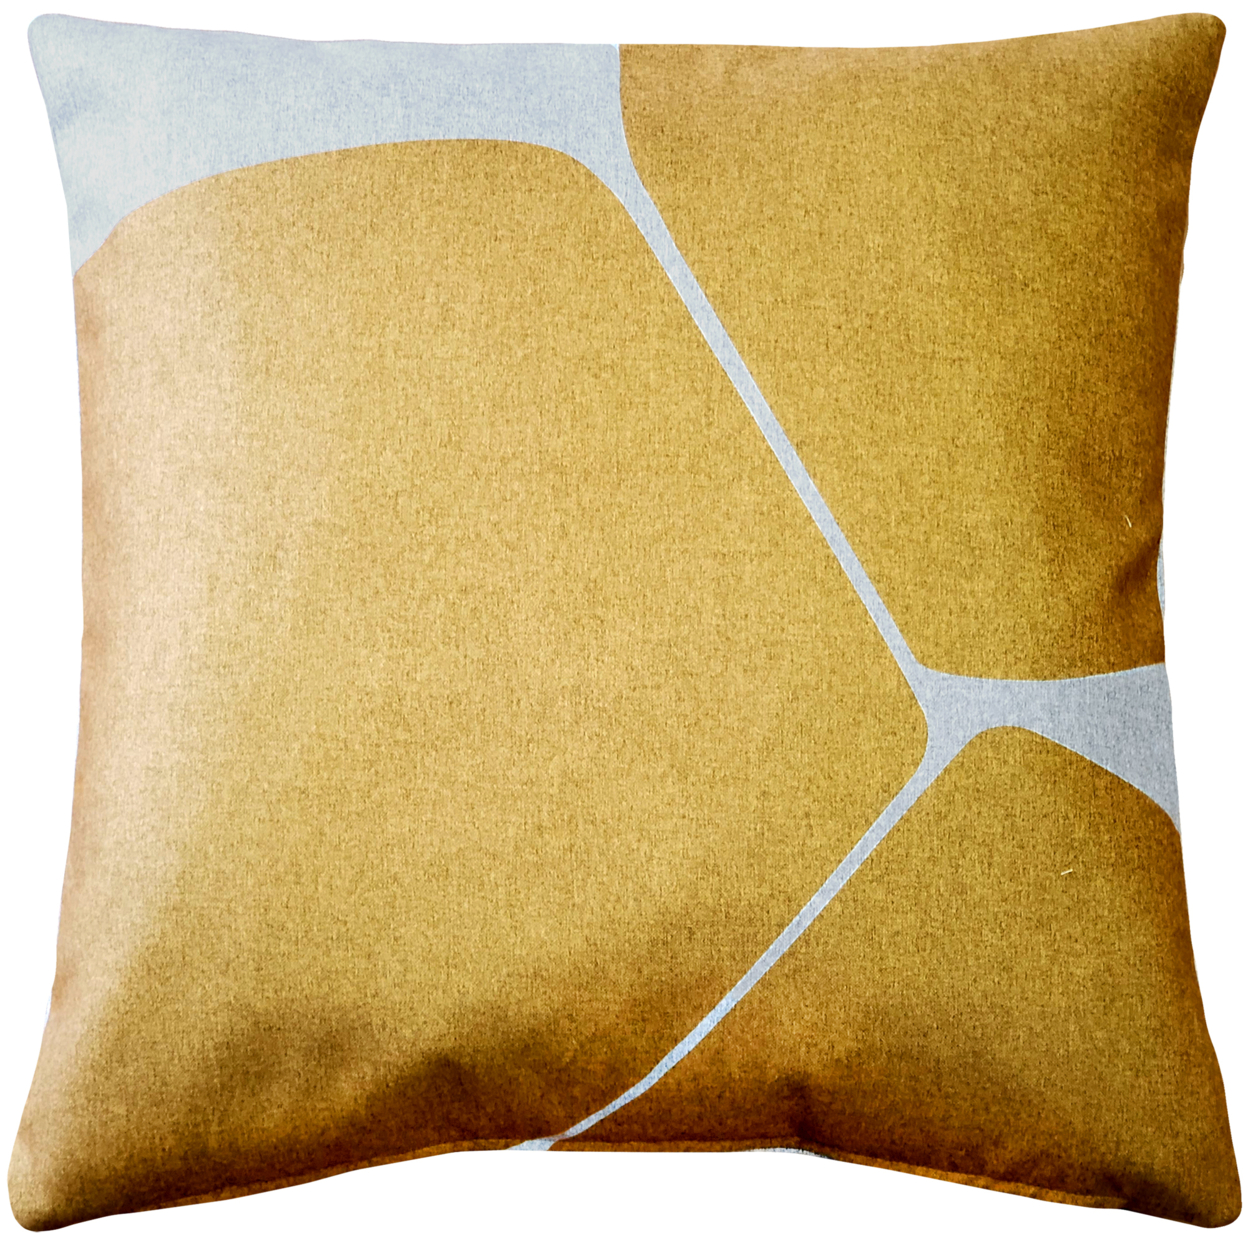 Aurora Renaissance Gold Throw Pillow 19x19 Inches Square, Complete Pillow with Polyfill Pillow Insert